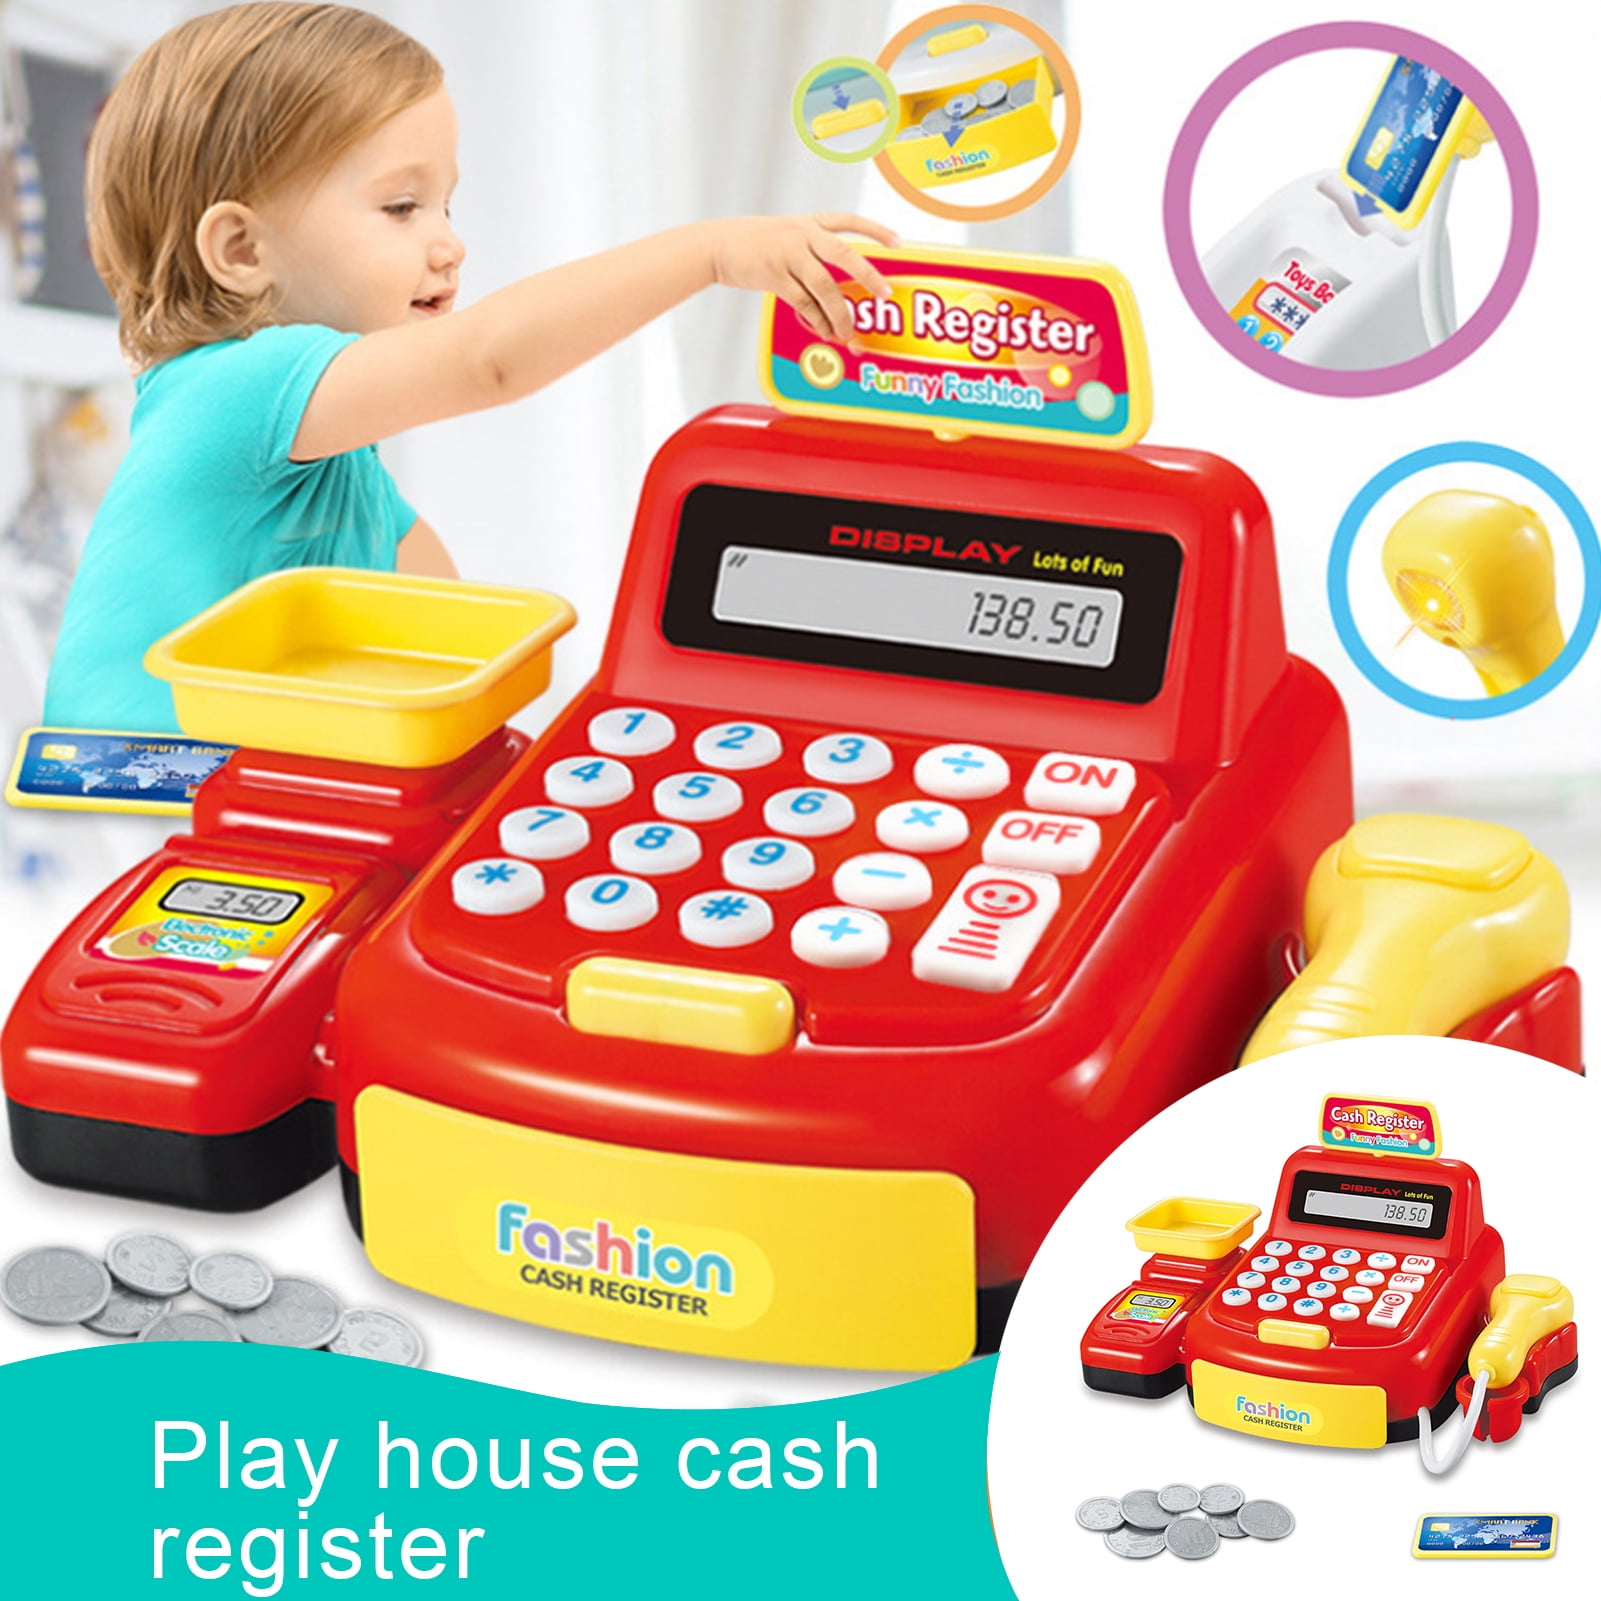 Children's Pretend Play Electronic Cash Register Playset w/ shopping cart PS321 